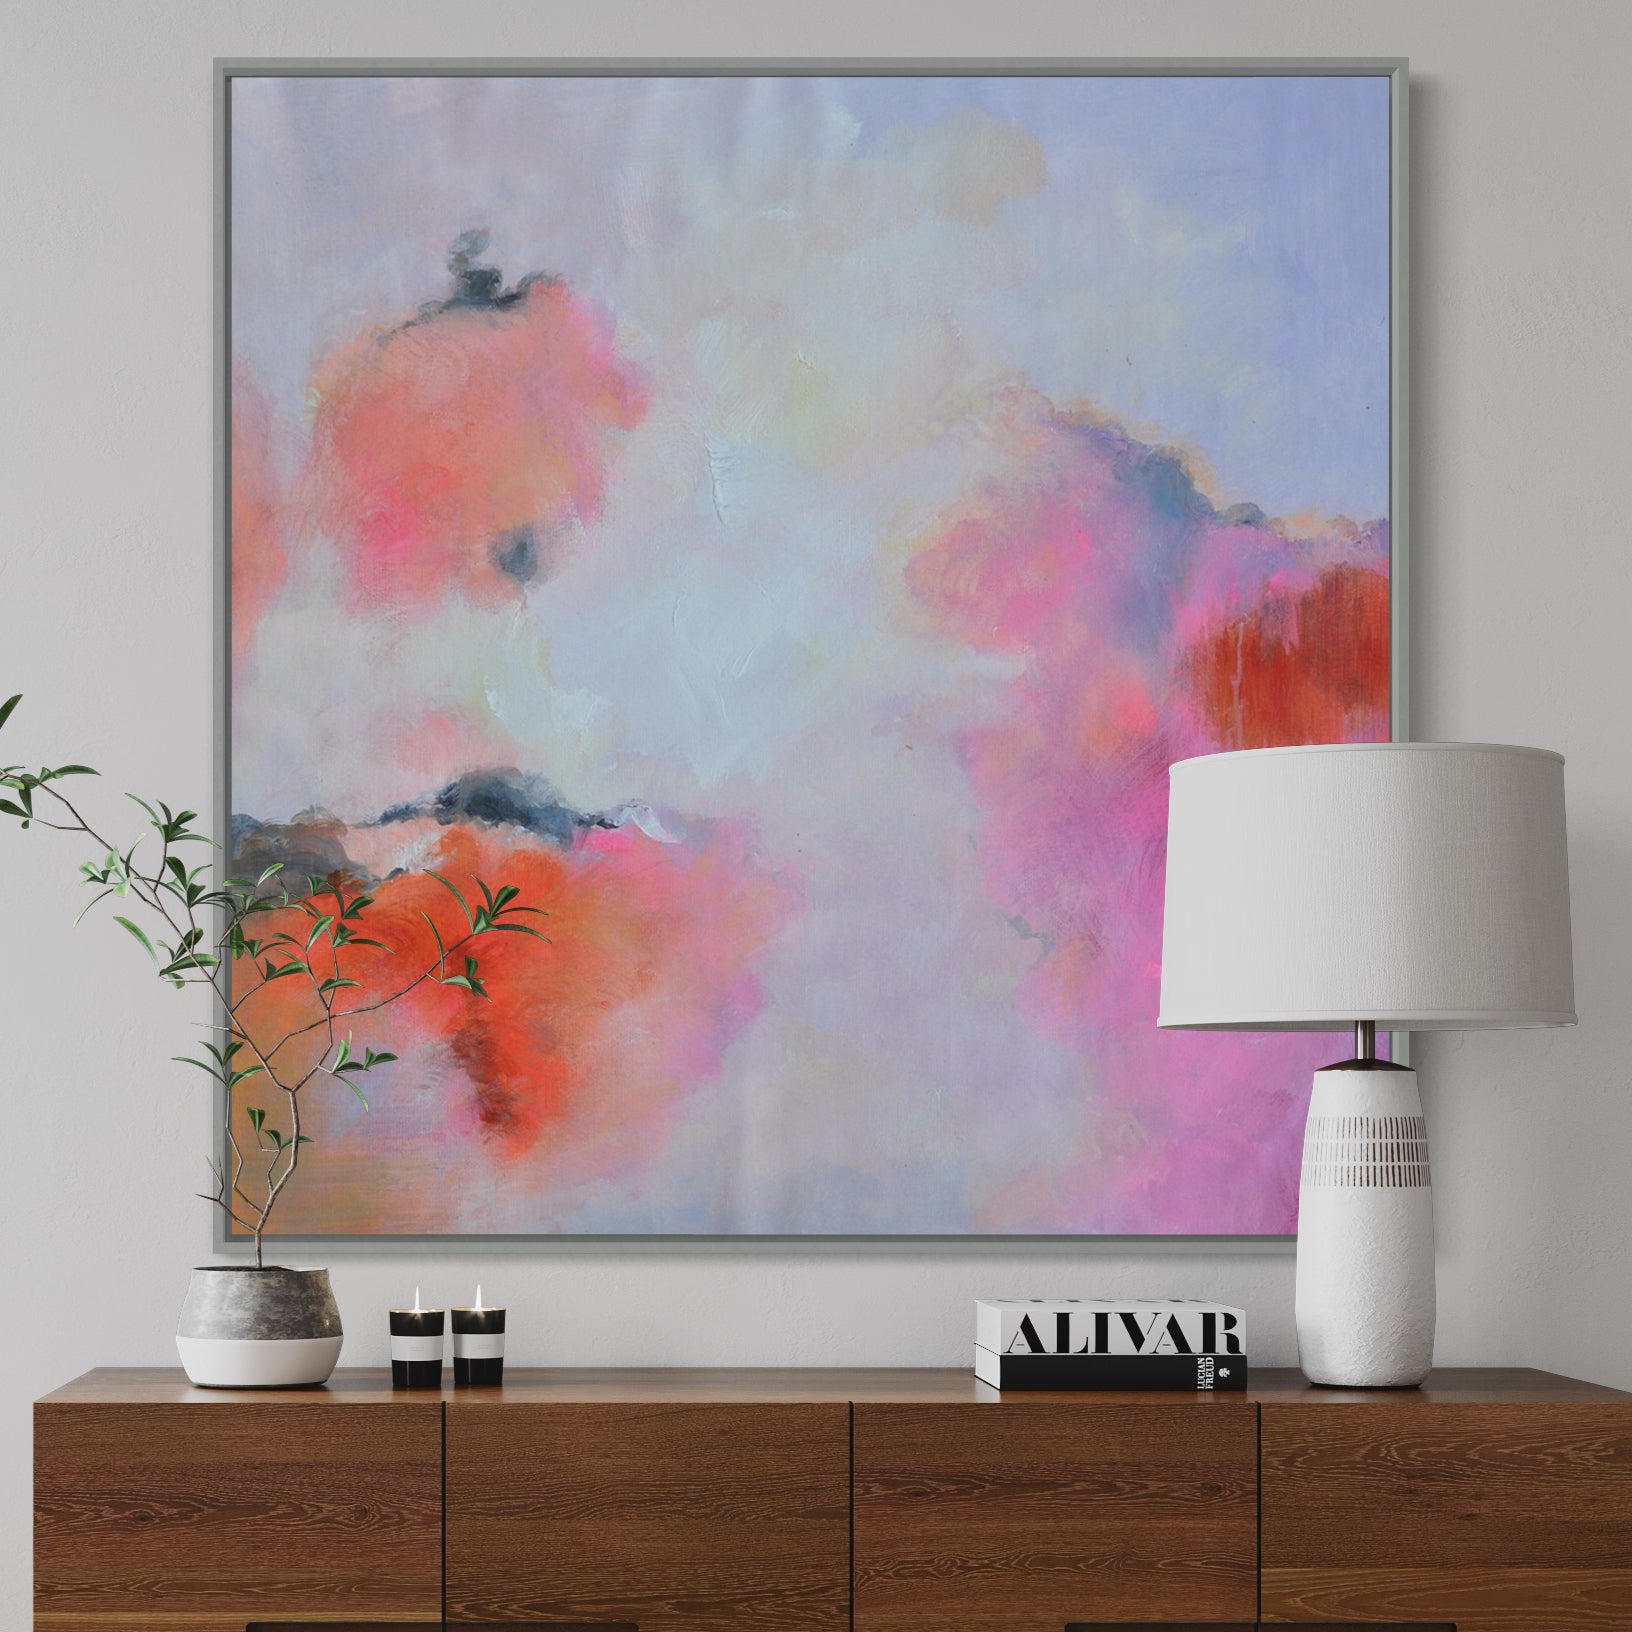 Cotton Candy, Gallery Wrap (With Bleed) / 80x80cm